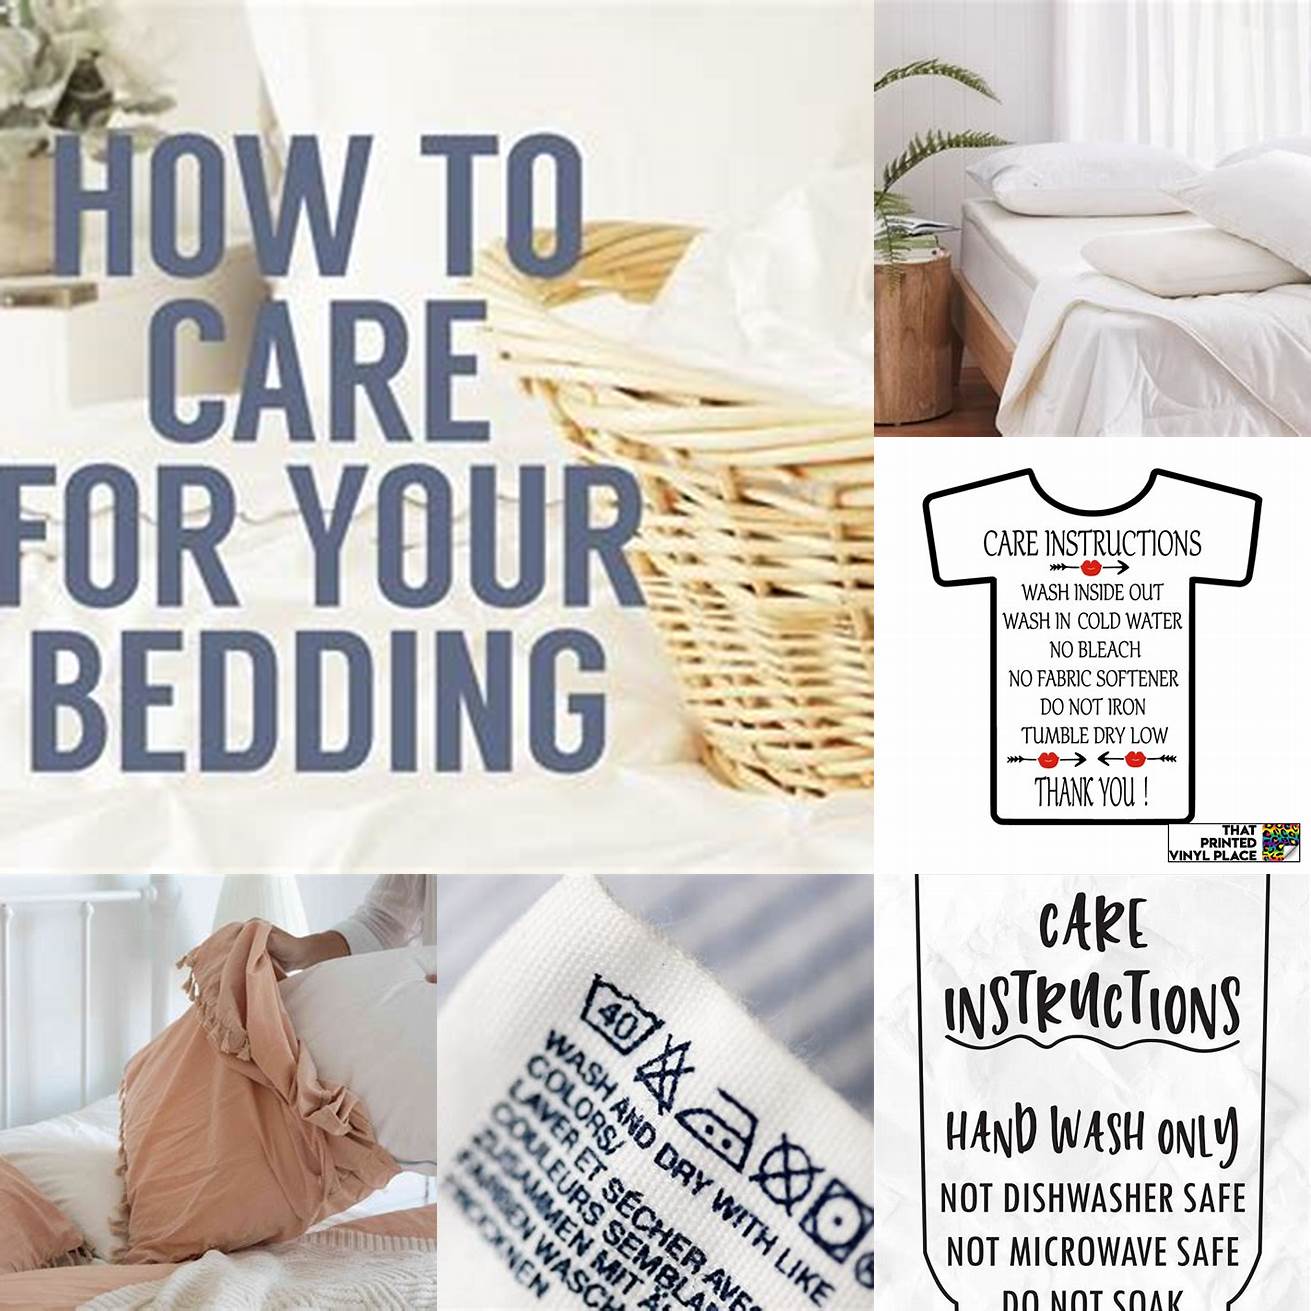 Follow Care Instructions Follow the care instructions provided with your bedding to ensure that it stays in good condition